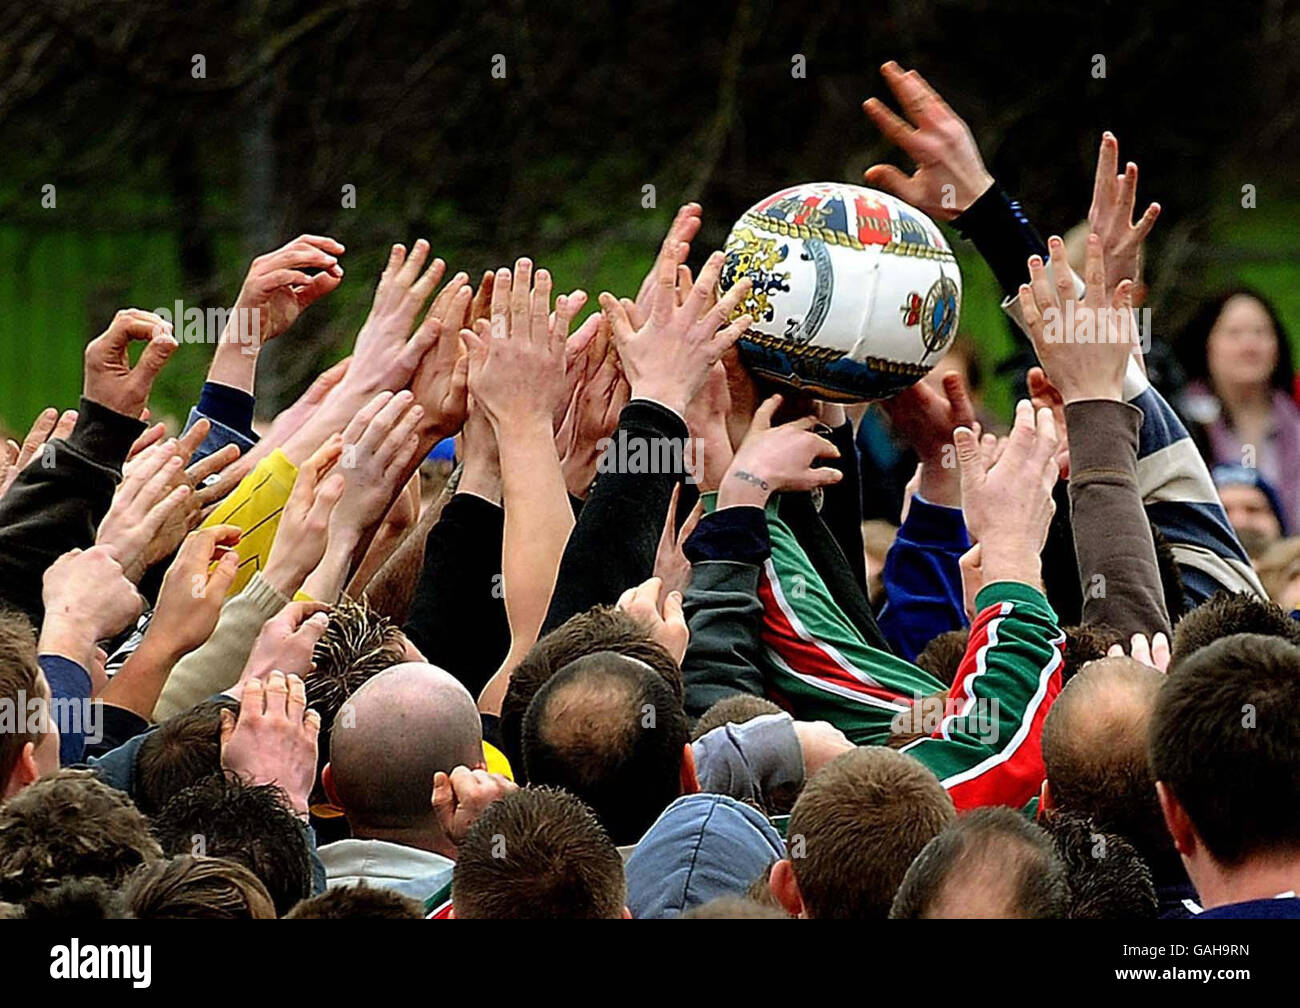 Participants pictured playing in the Ashbourne Shrovetide football match in Ashbourne, Derbyshire. Stock Photo